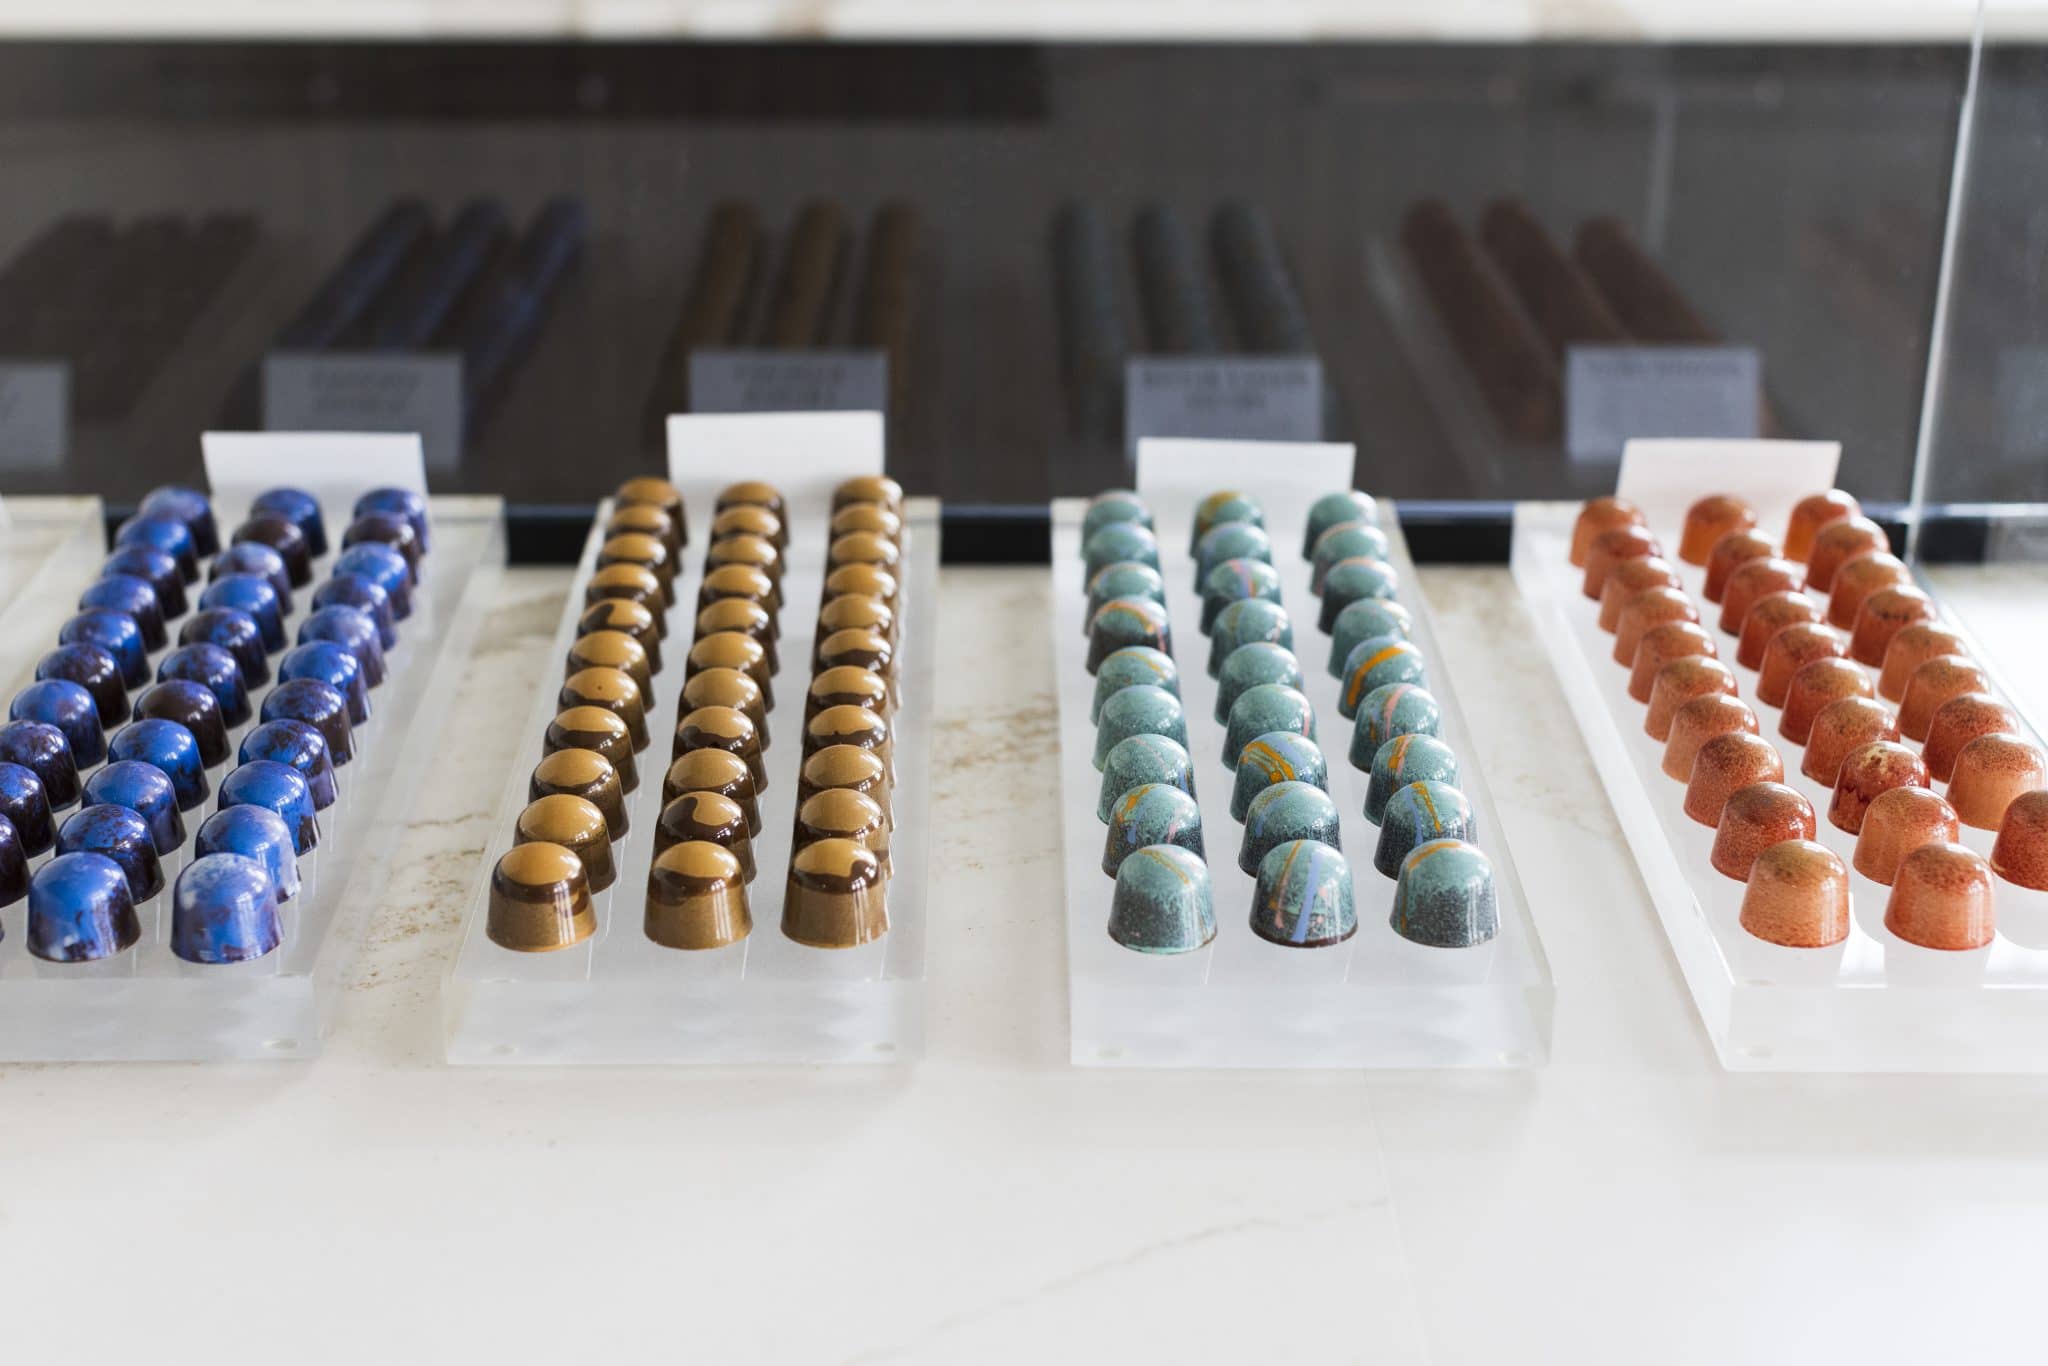 4 trays with 3 rows of gourmet chocolate truffles on each one. The truffles on the left are dark blue, then tan, light blue, and orange on the on the right